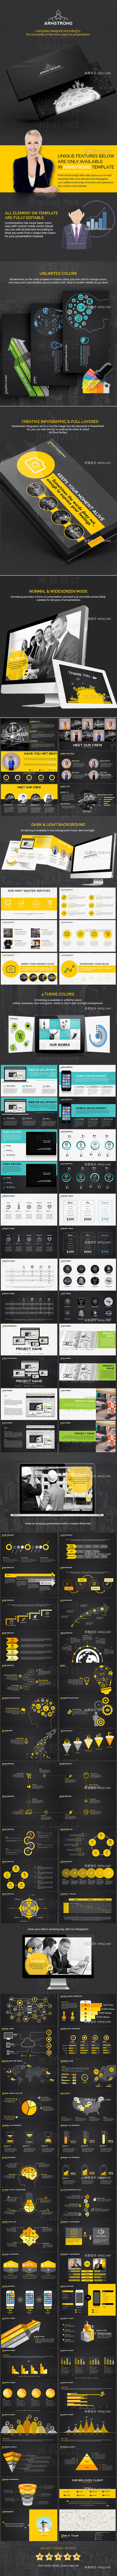 PPT模板 armstrong outer space powerpoint template